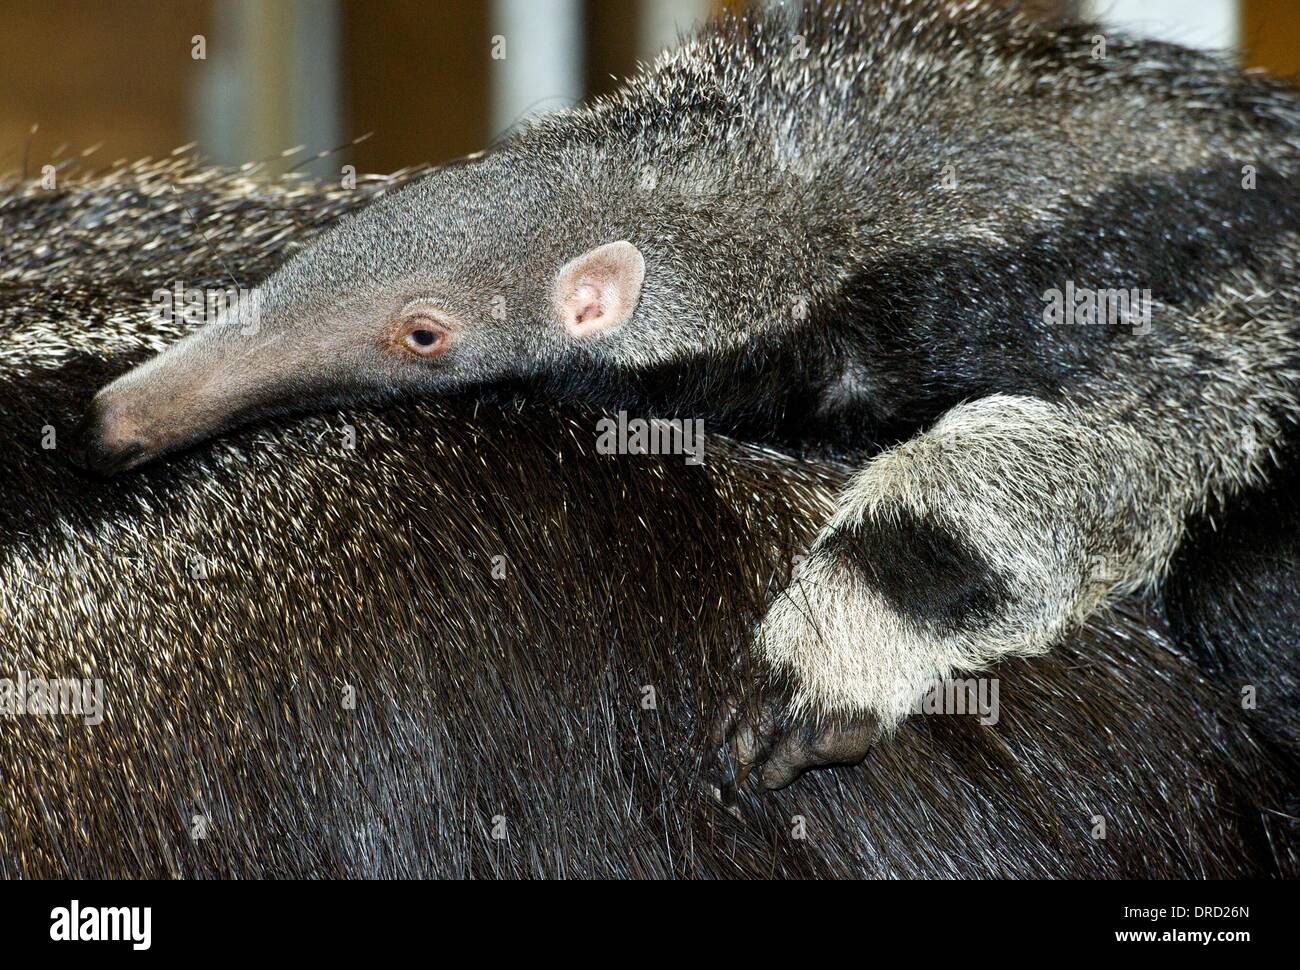 Halle, Germany. 23rd Jan, 2014. Anteater Stella's young holds on to her fur at the zoo in Halle, Germany, 23 January 2014. The young animal was born on 06 November 2013 and is being christened Eusebio. The name is a reference to the Brazilian soccer player Eusebio who died in 05 January 2014. Photo: PETER ENDIG/dpa/Alamy Live News Stock Photo